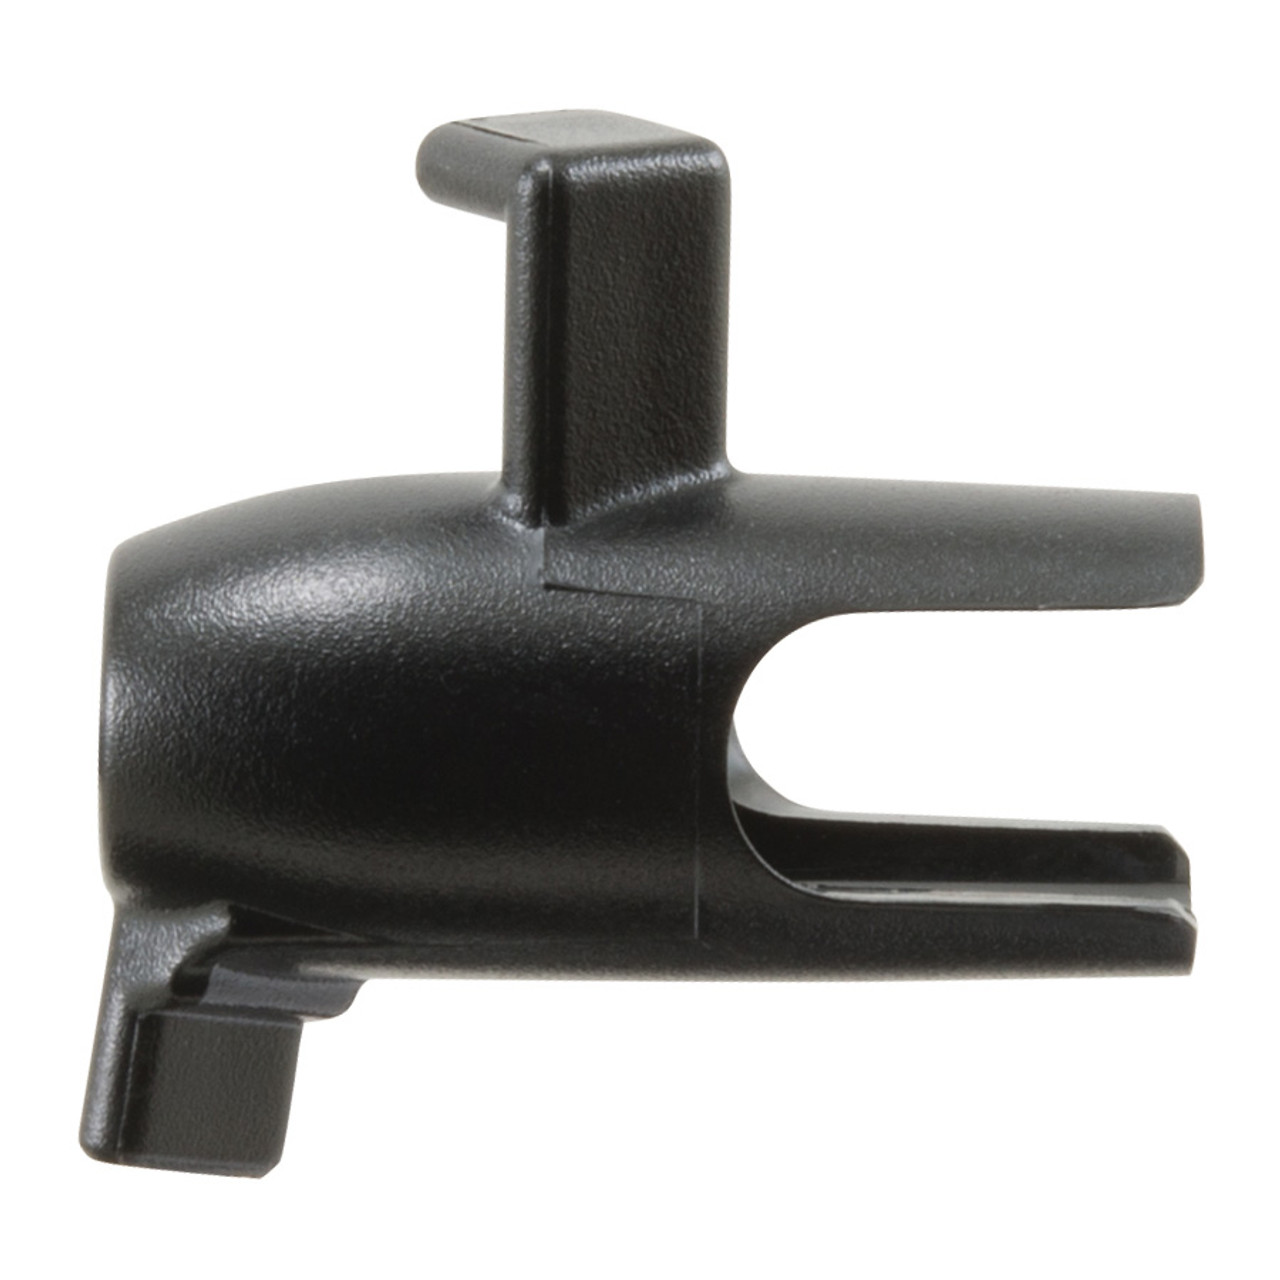 Iwata Freestyle Air Dual Position Airbrush Holder - Norcostco, Inc.